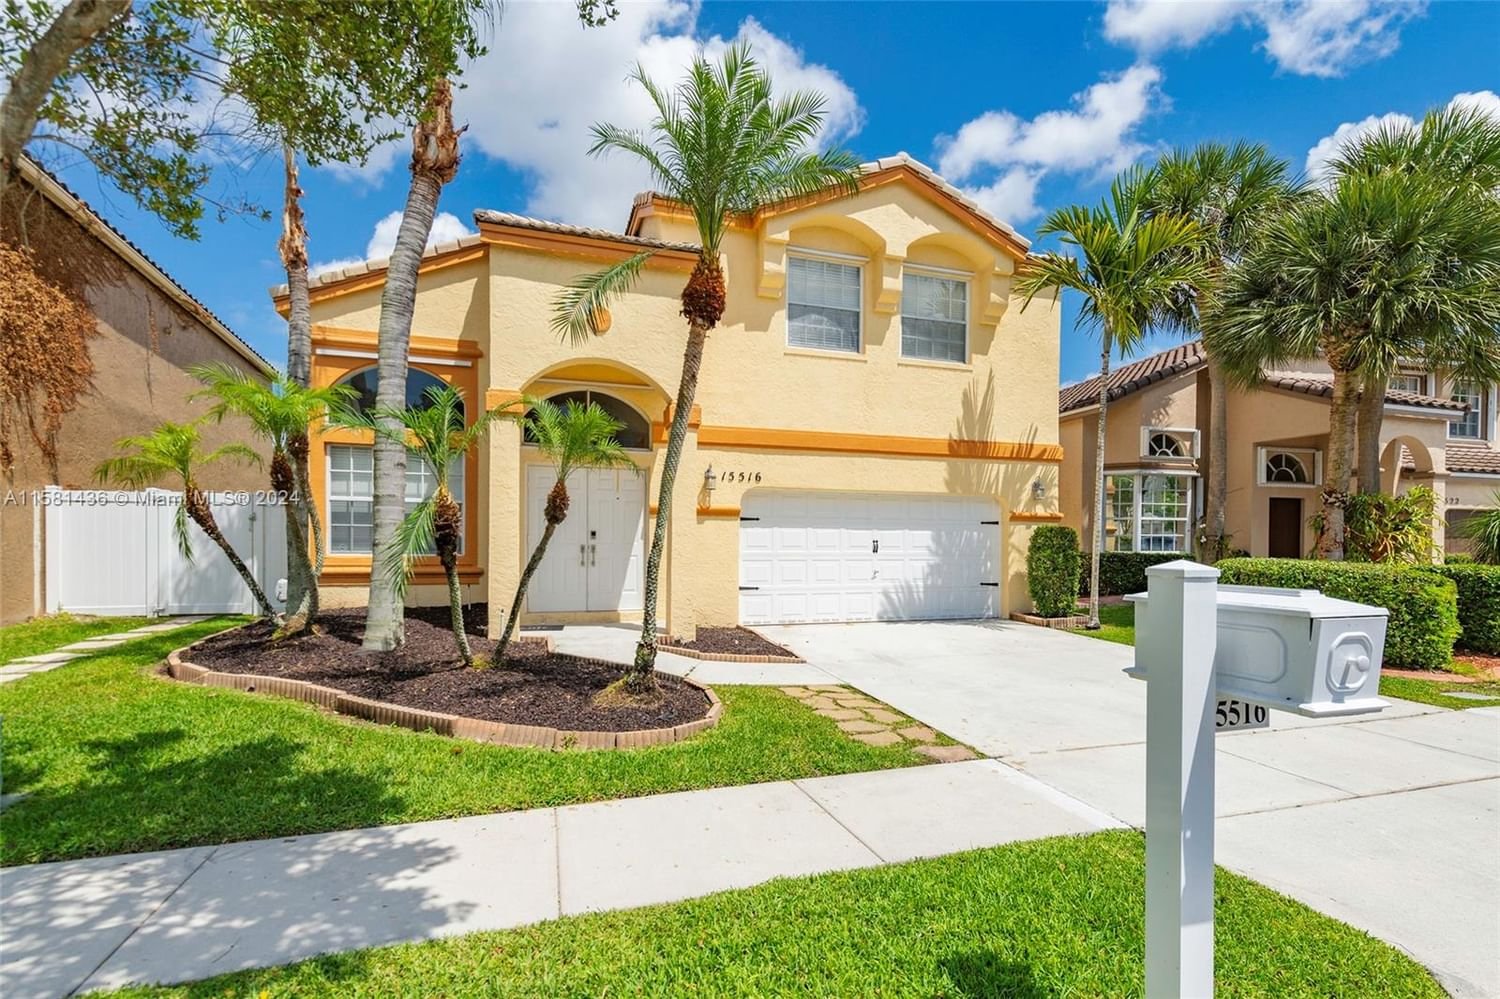 Real estate property located at 15516 12th Ct, Broward County, TOWNGATE, Pembroke Pines, FL